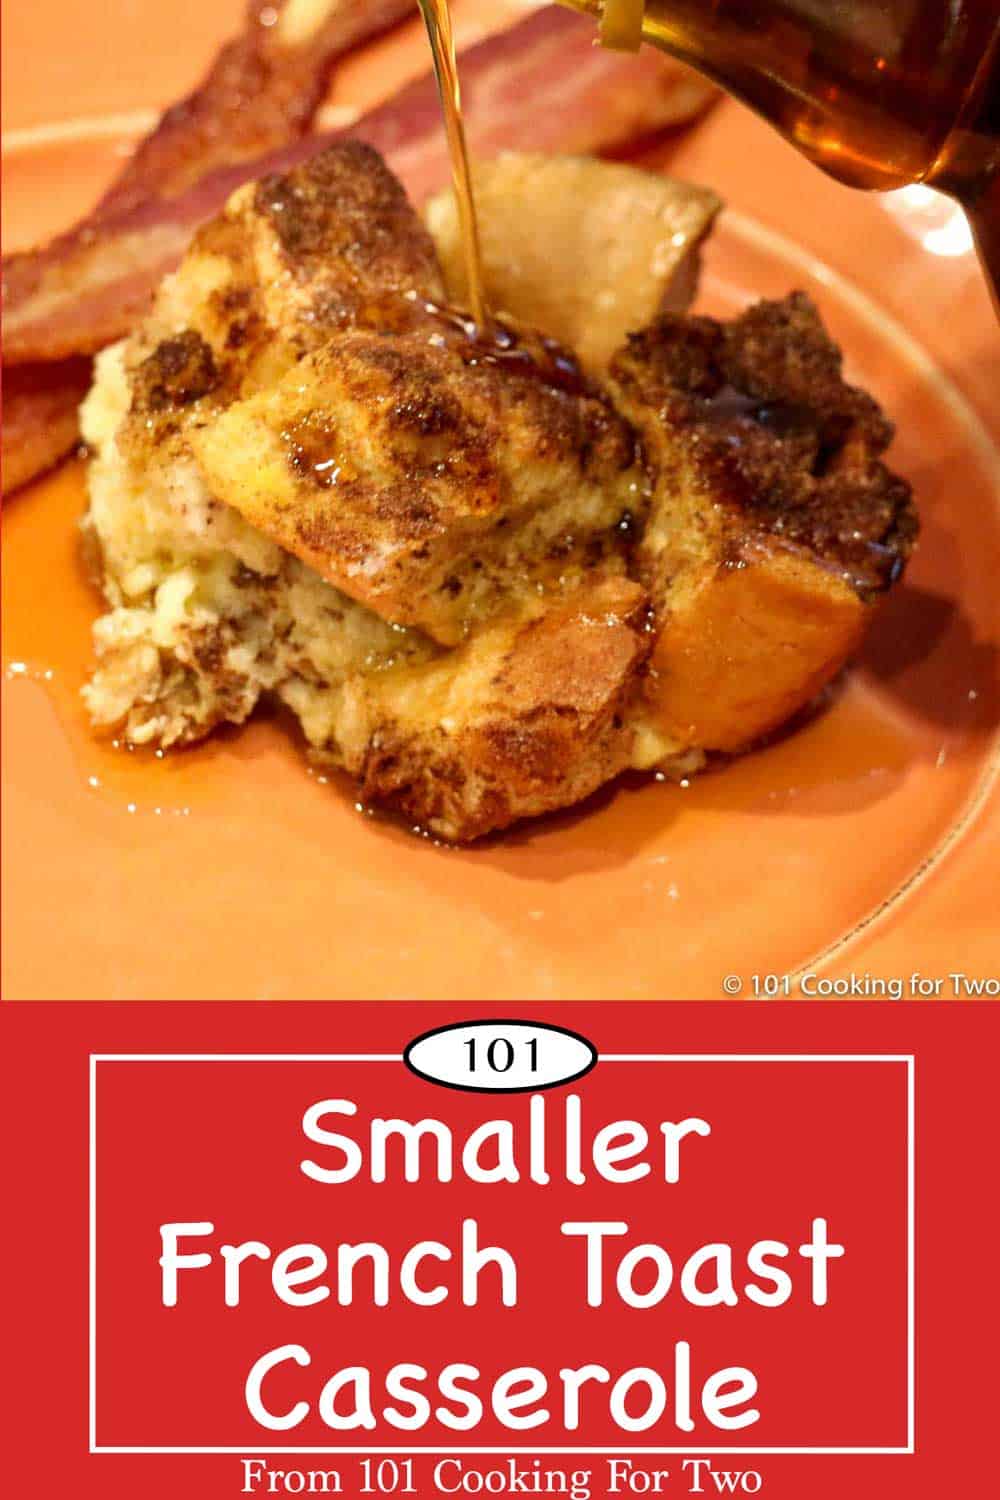 Smaller French Toast Casserole - 101 Cooking For Two